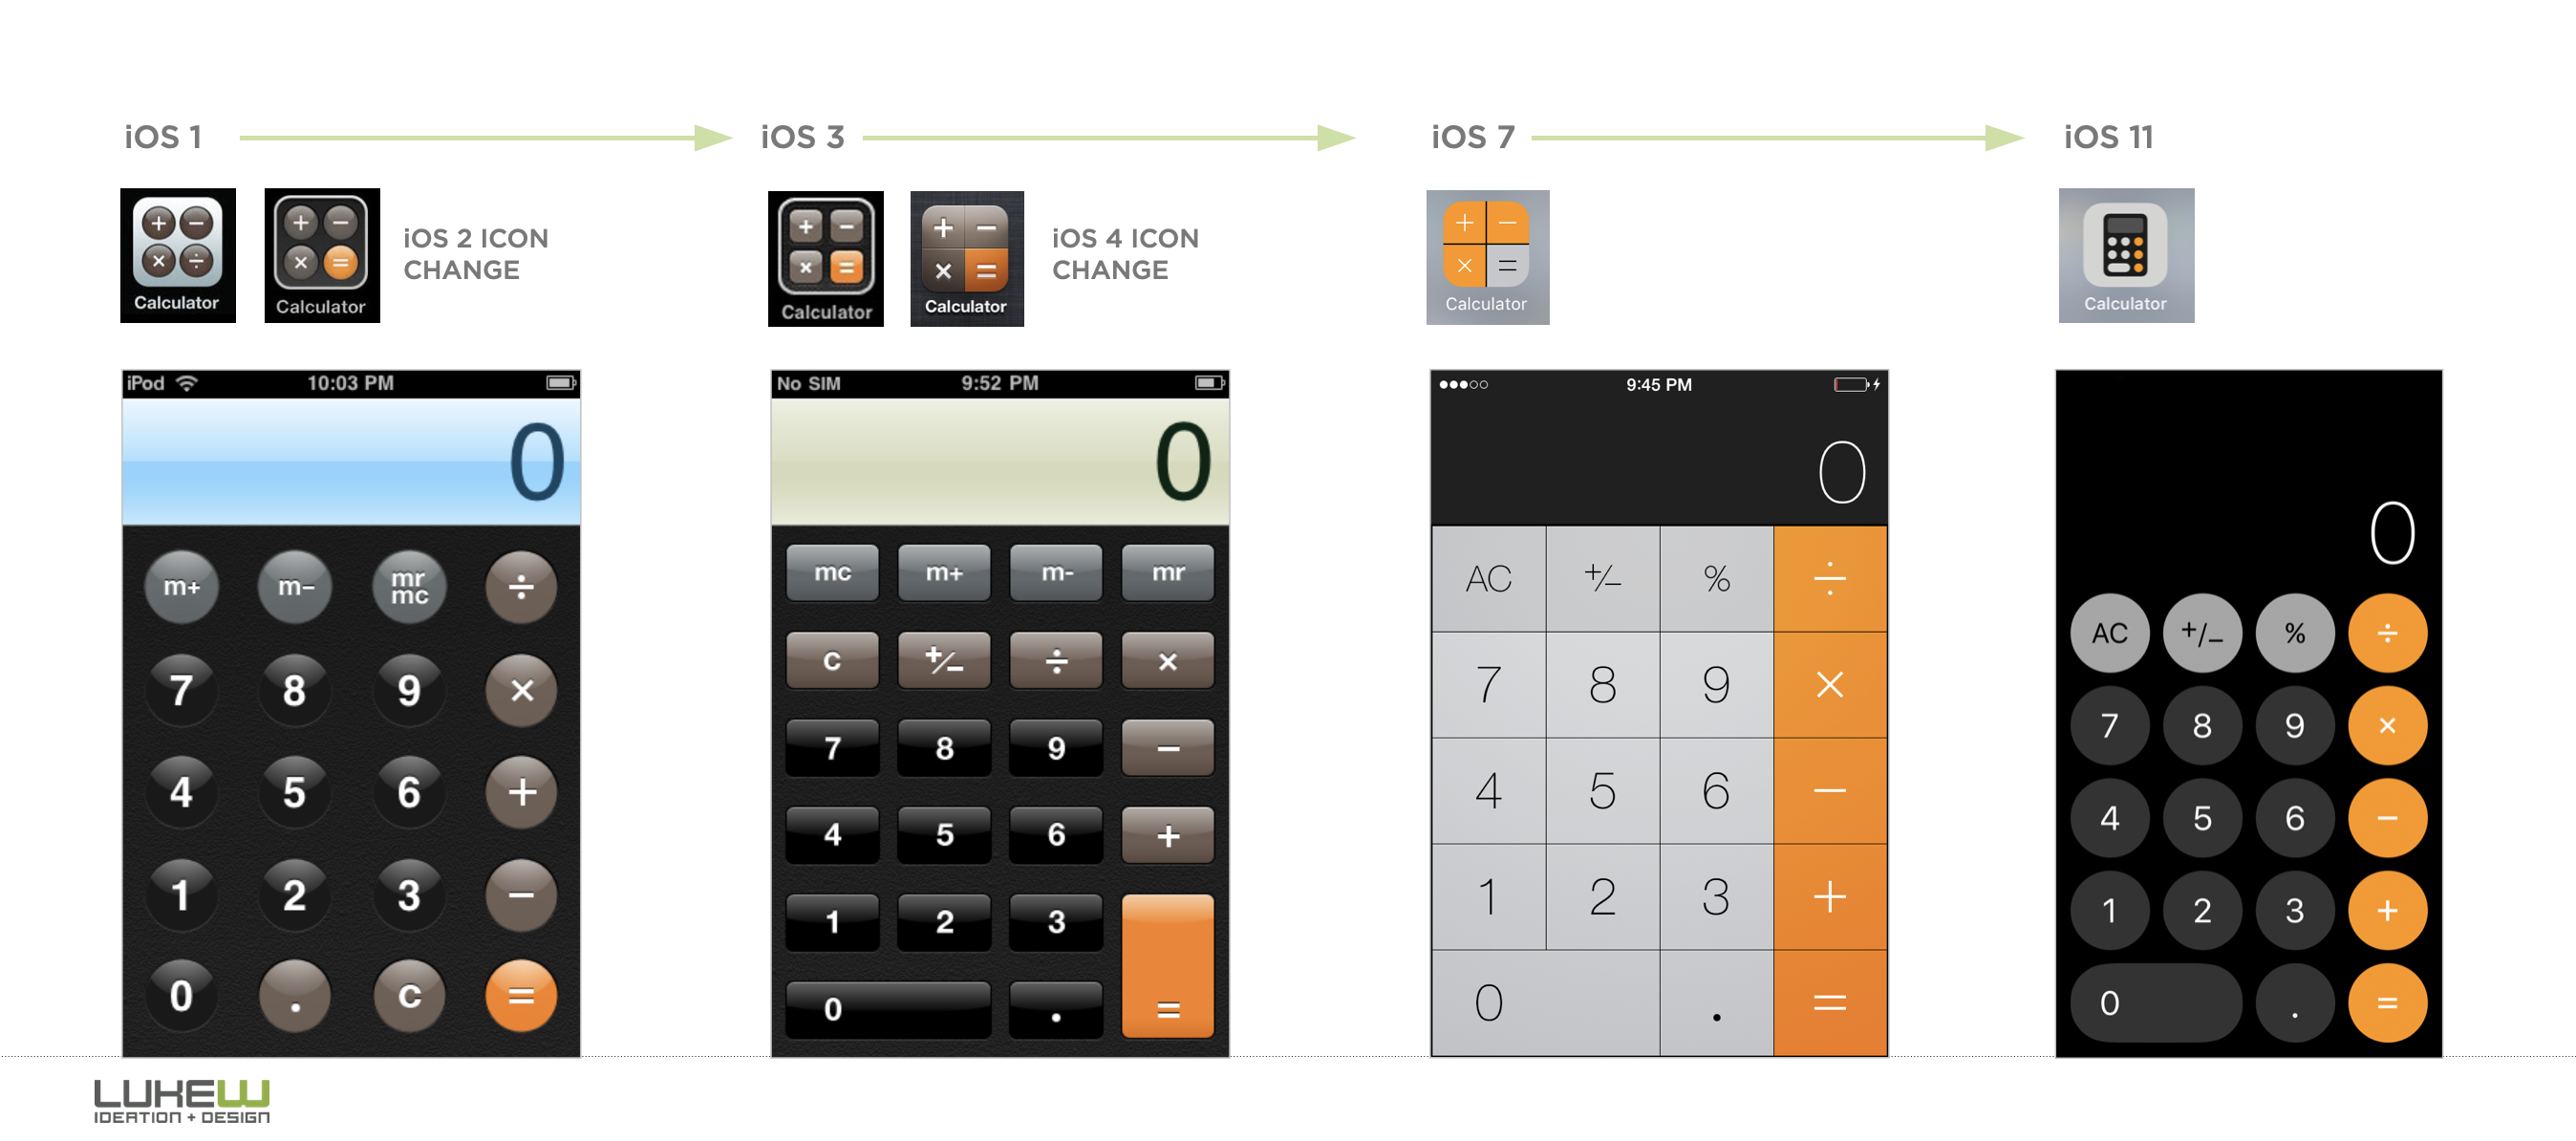 Design is never done: the iOS calculator edition